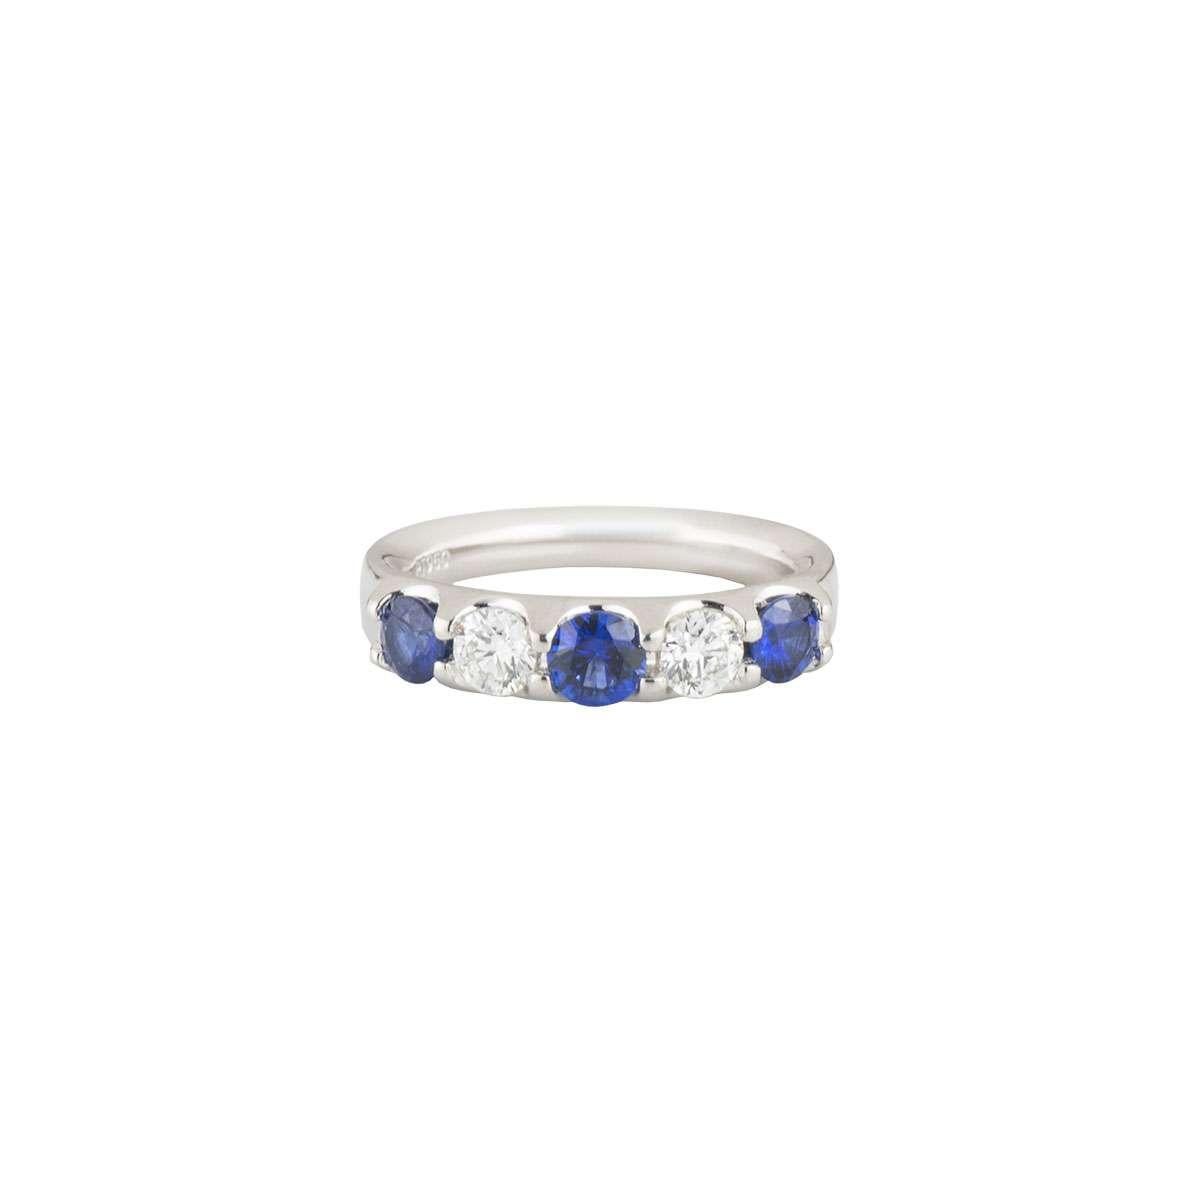 A sapphire and diamond half eternity ring in platinum. The ring is set to the front with 3 sapphires and 2 diamonds, both round brilliant cut and in a shared setting. The sapphires have a total weight of approximately 0.51ct and the diamonds total